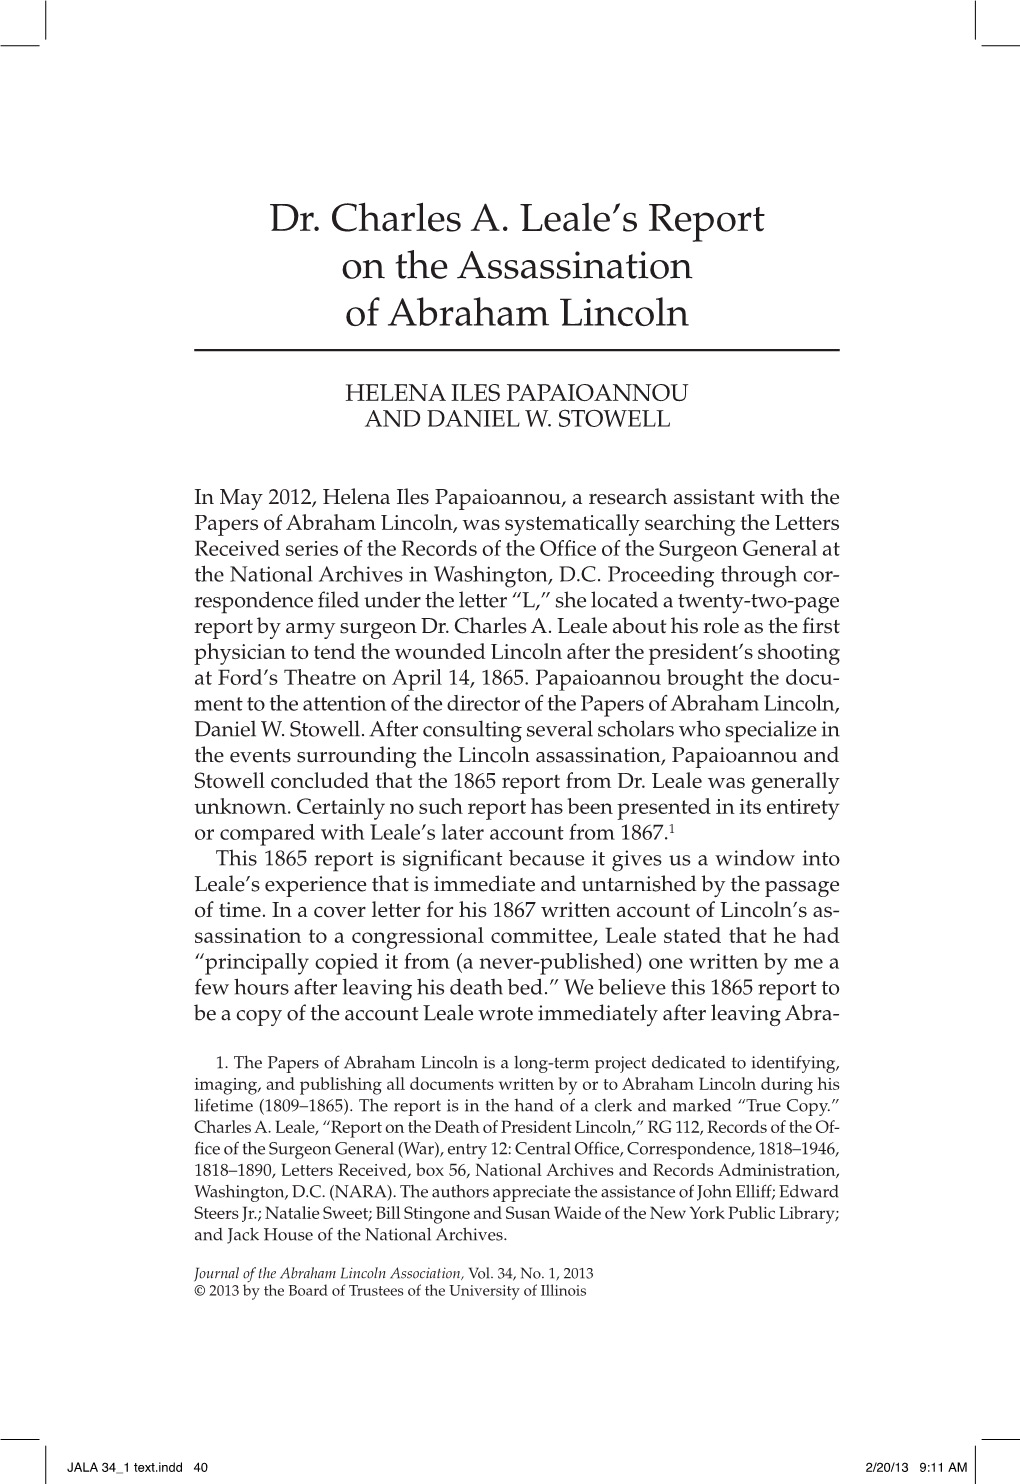 Dr. Charles A. Leale's Report on the Assassination